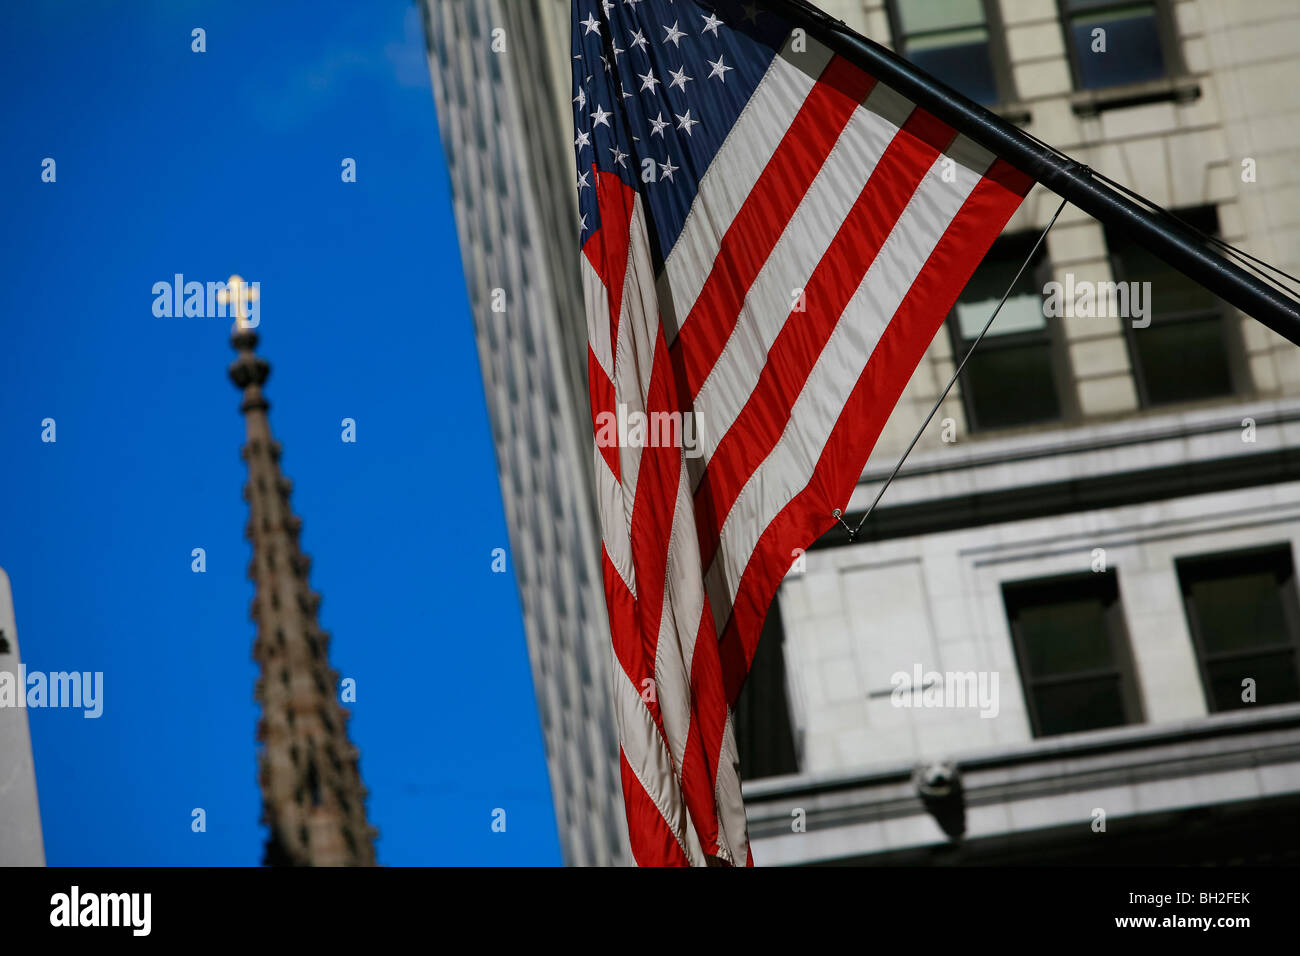 Wall Street and the New York Stock Exchange in New York with a huge American flag Stock Photo